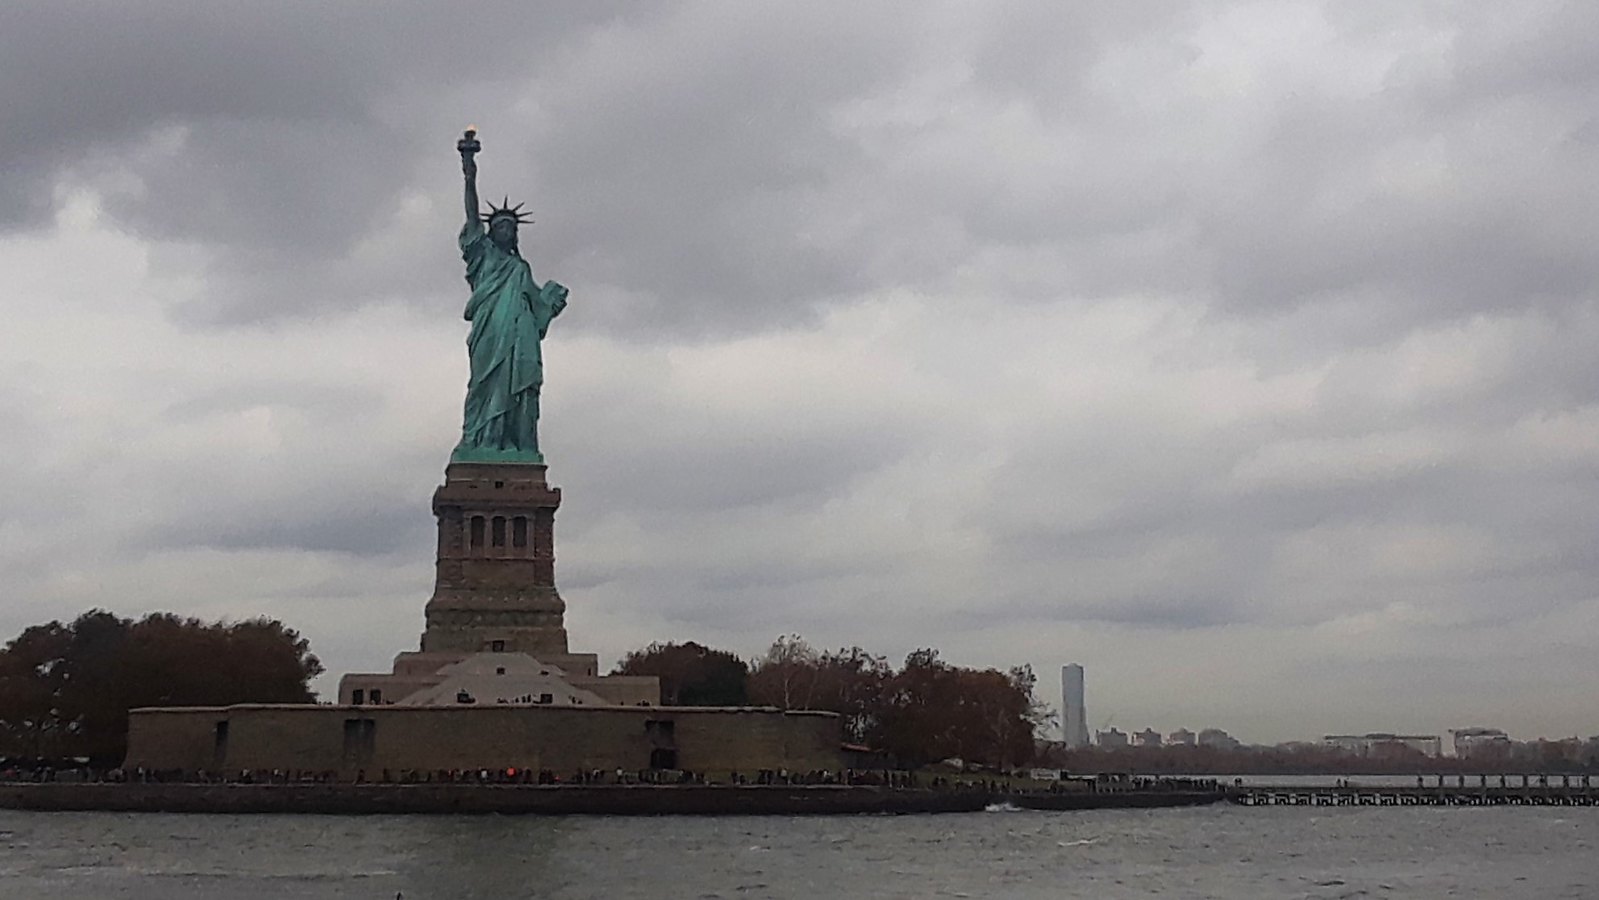 The Statue of Liberty from the ferry